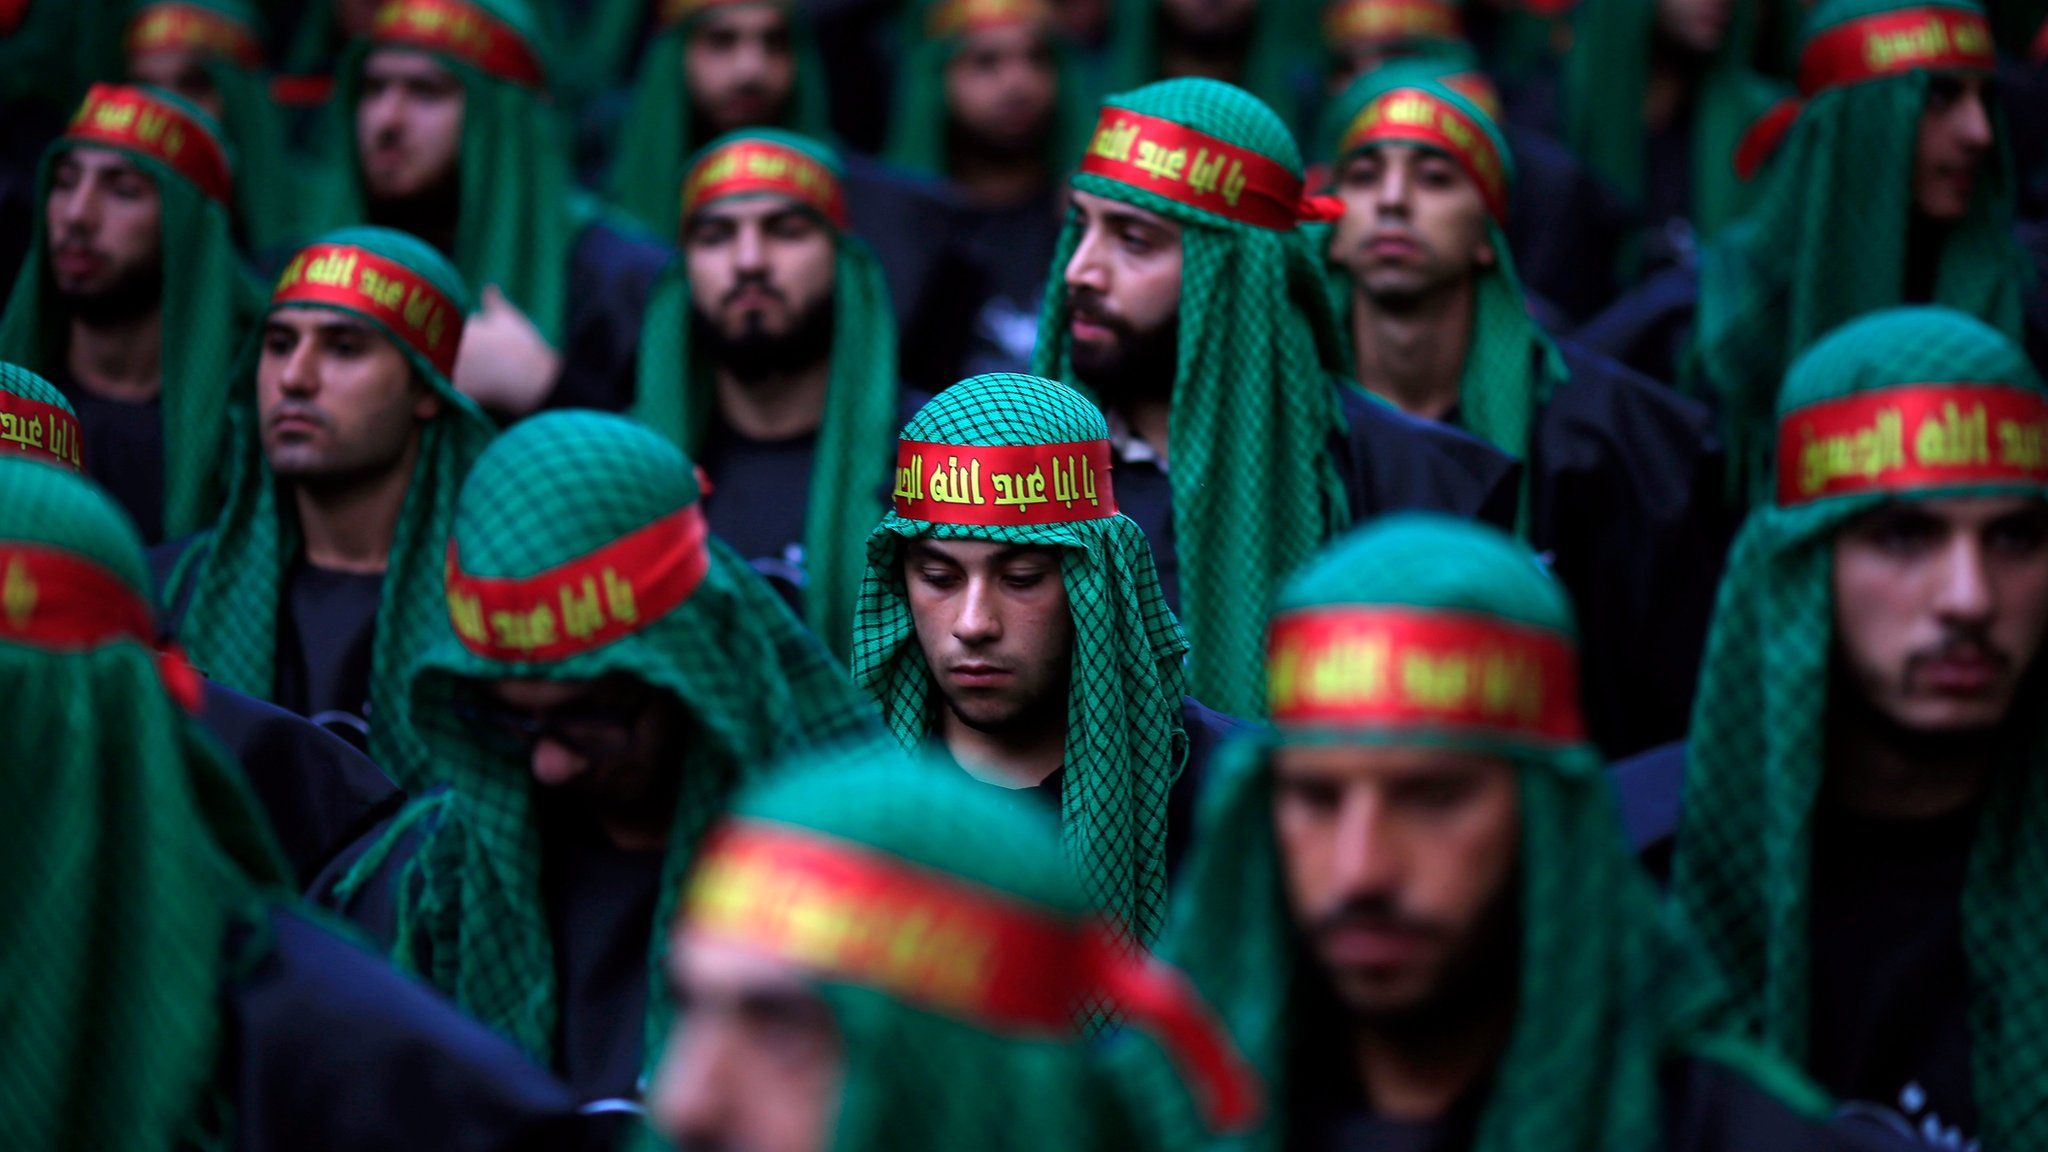 Lebanese Shia supporters of Hezbollah listen to the story of Imam Hussein in Beirut